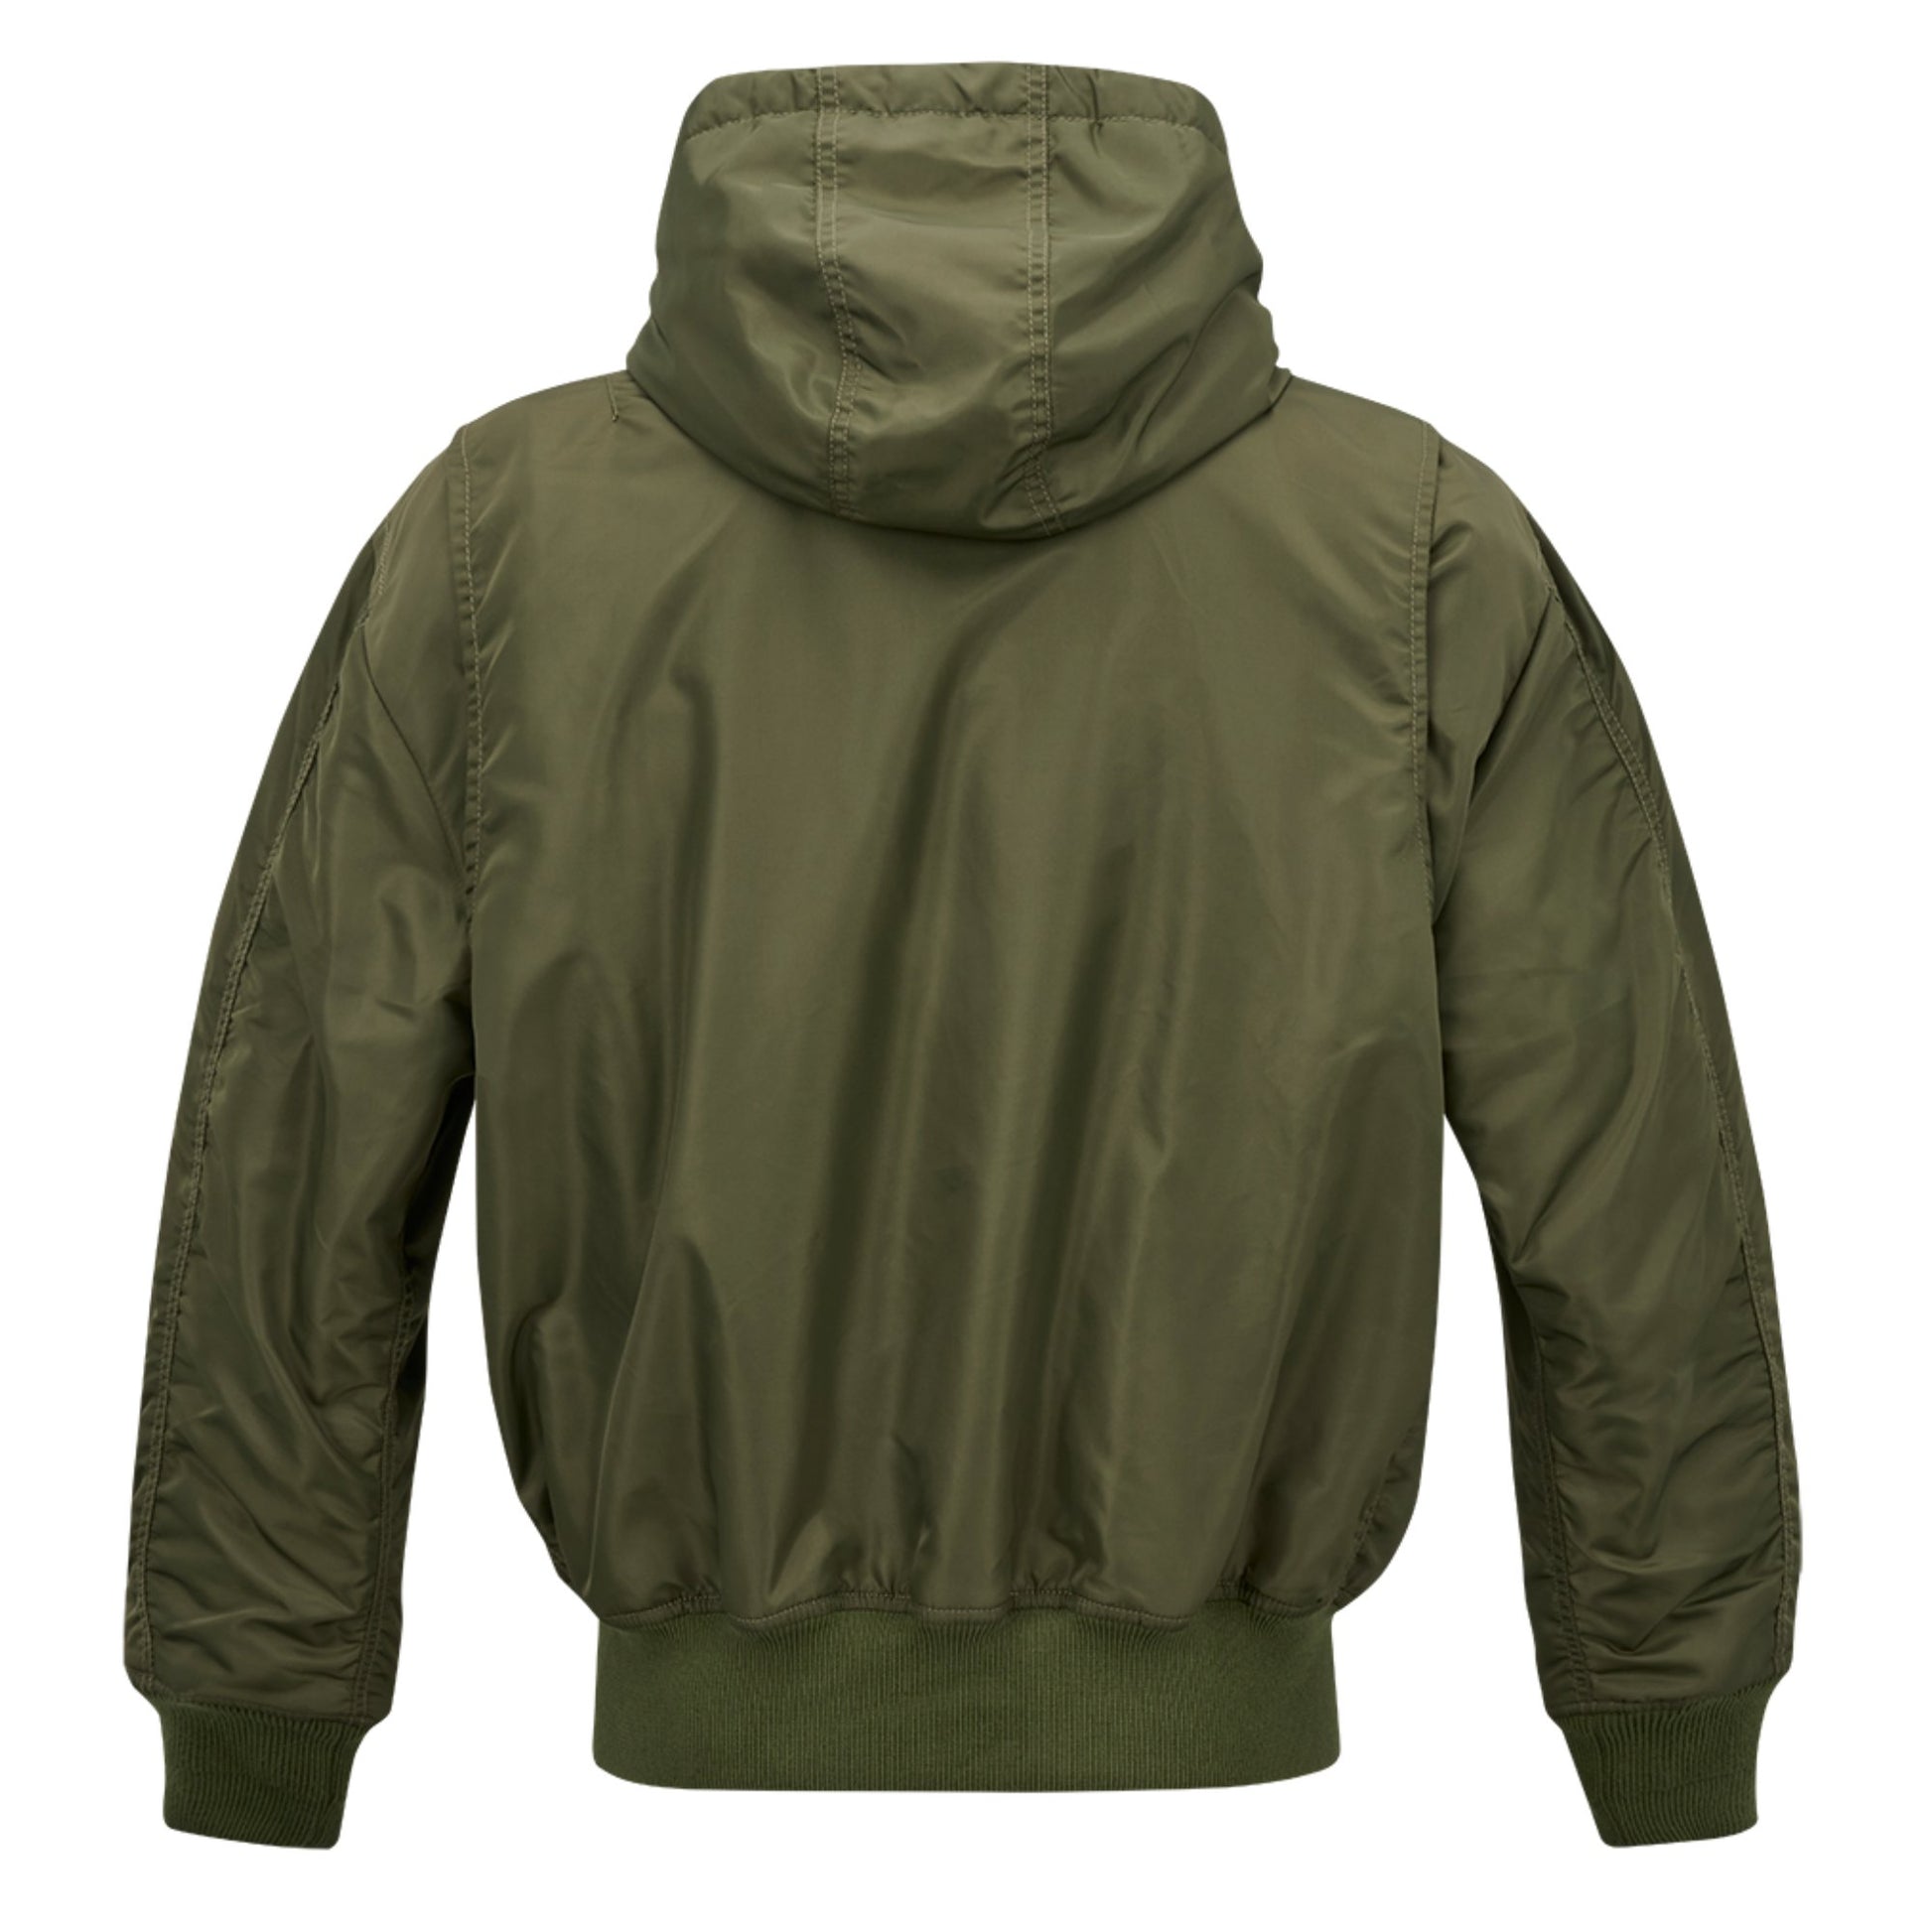 Warm & Cozy Men's Olive Hooded Jacket - BeExtra! Apparel & More